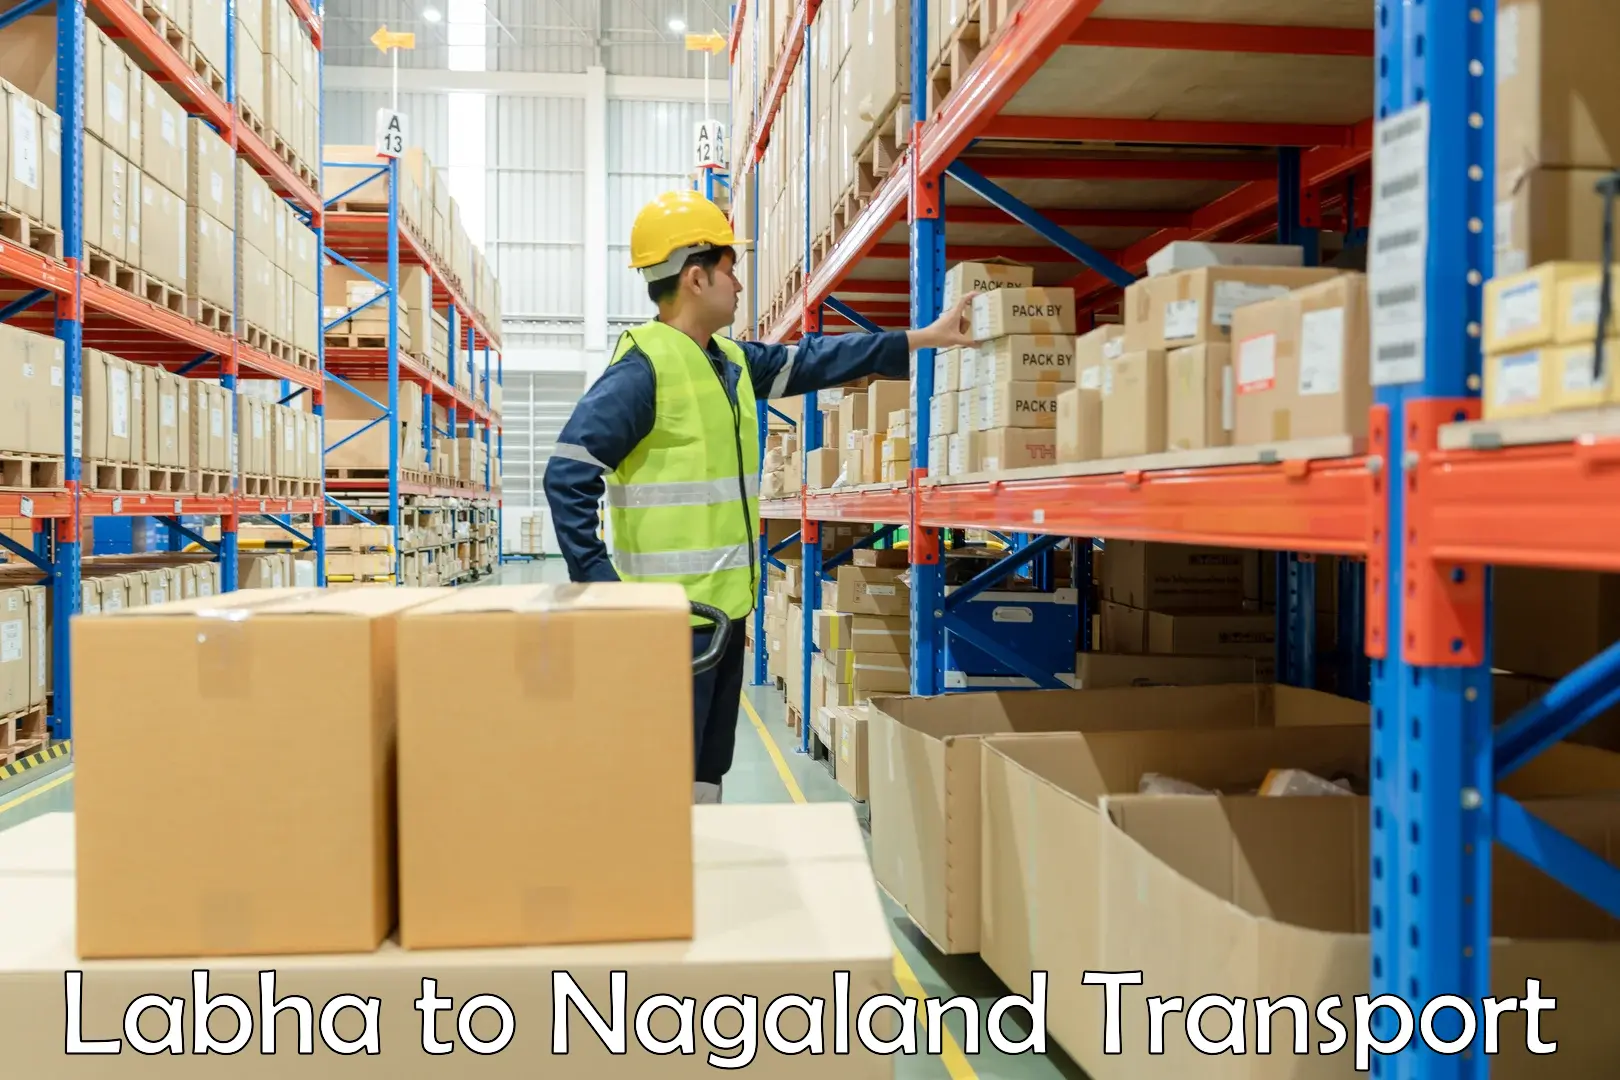 Express transport services in Labha to Nagaland